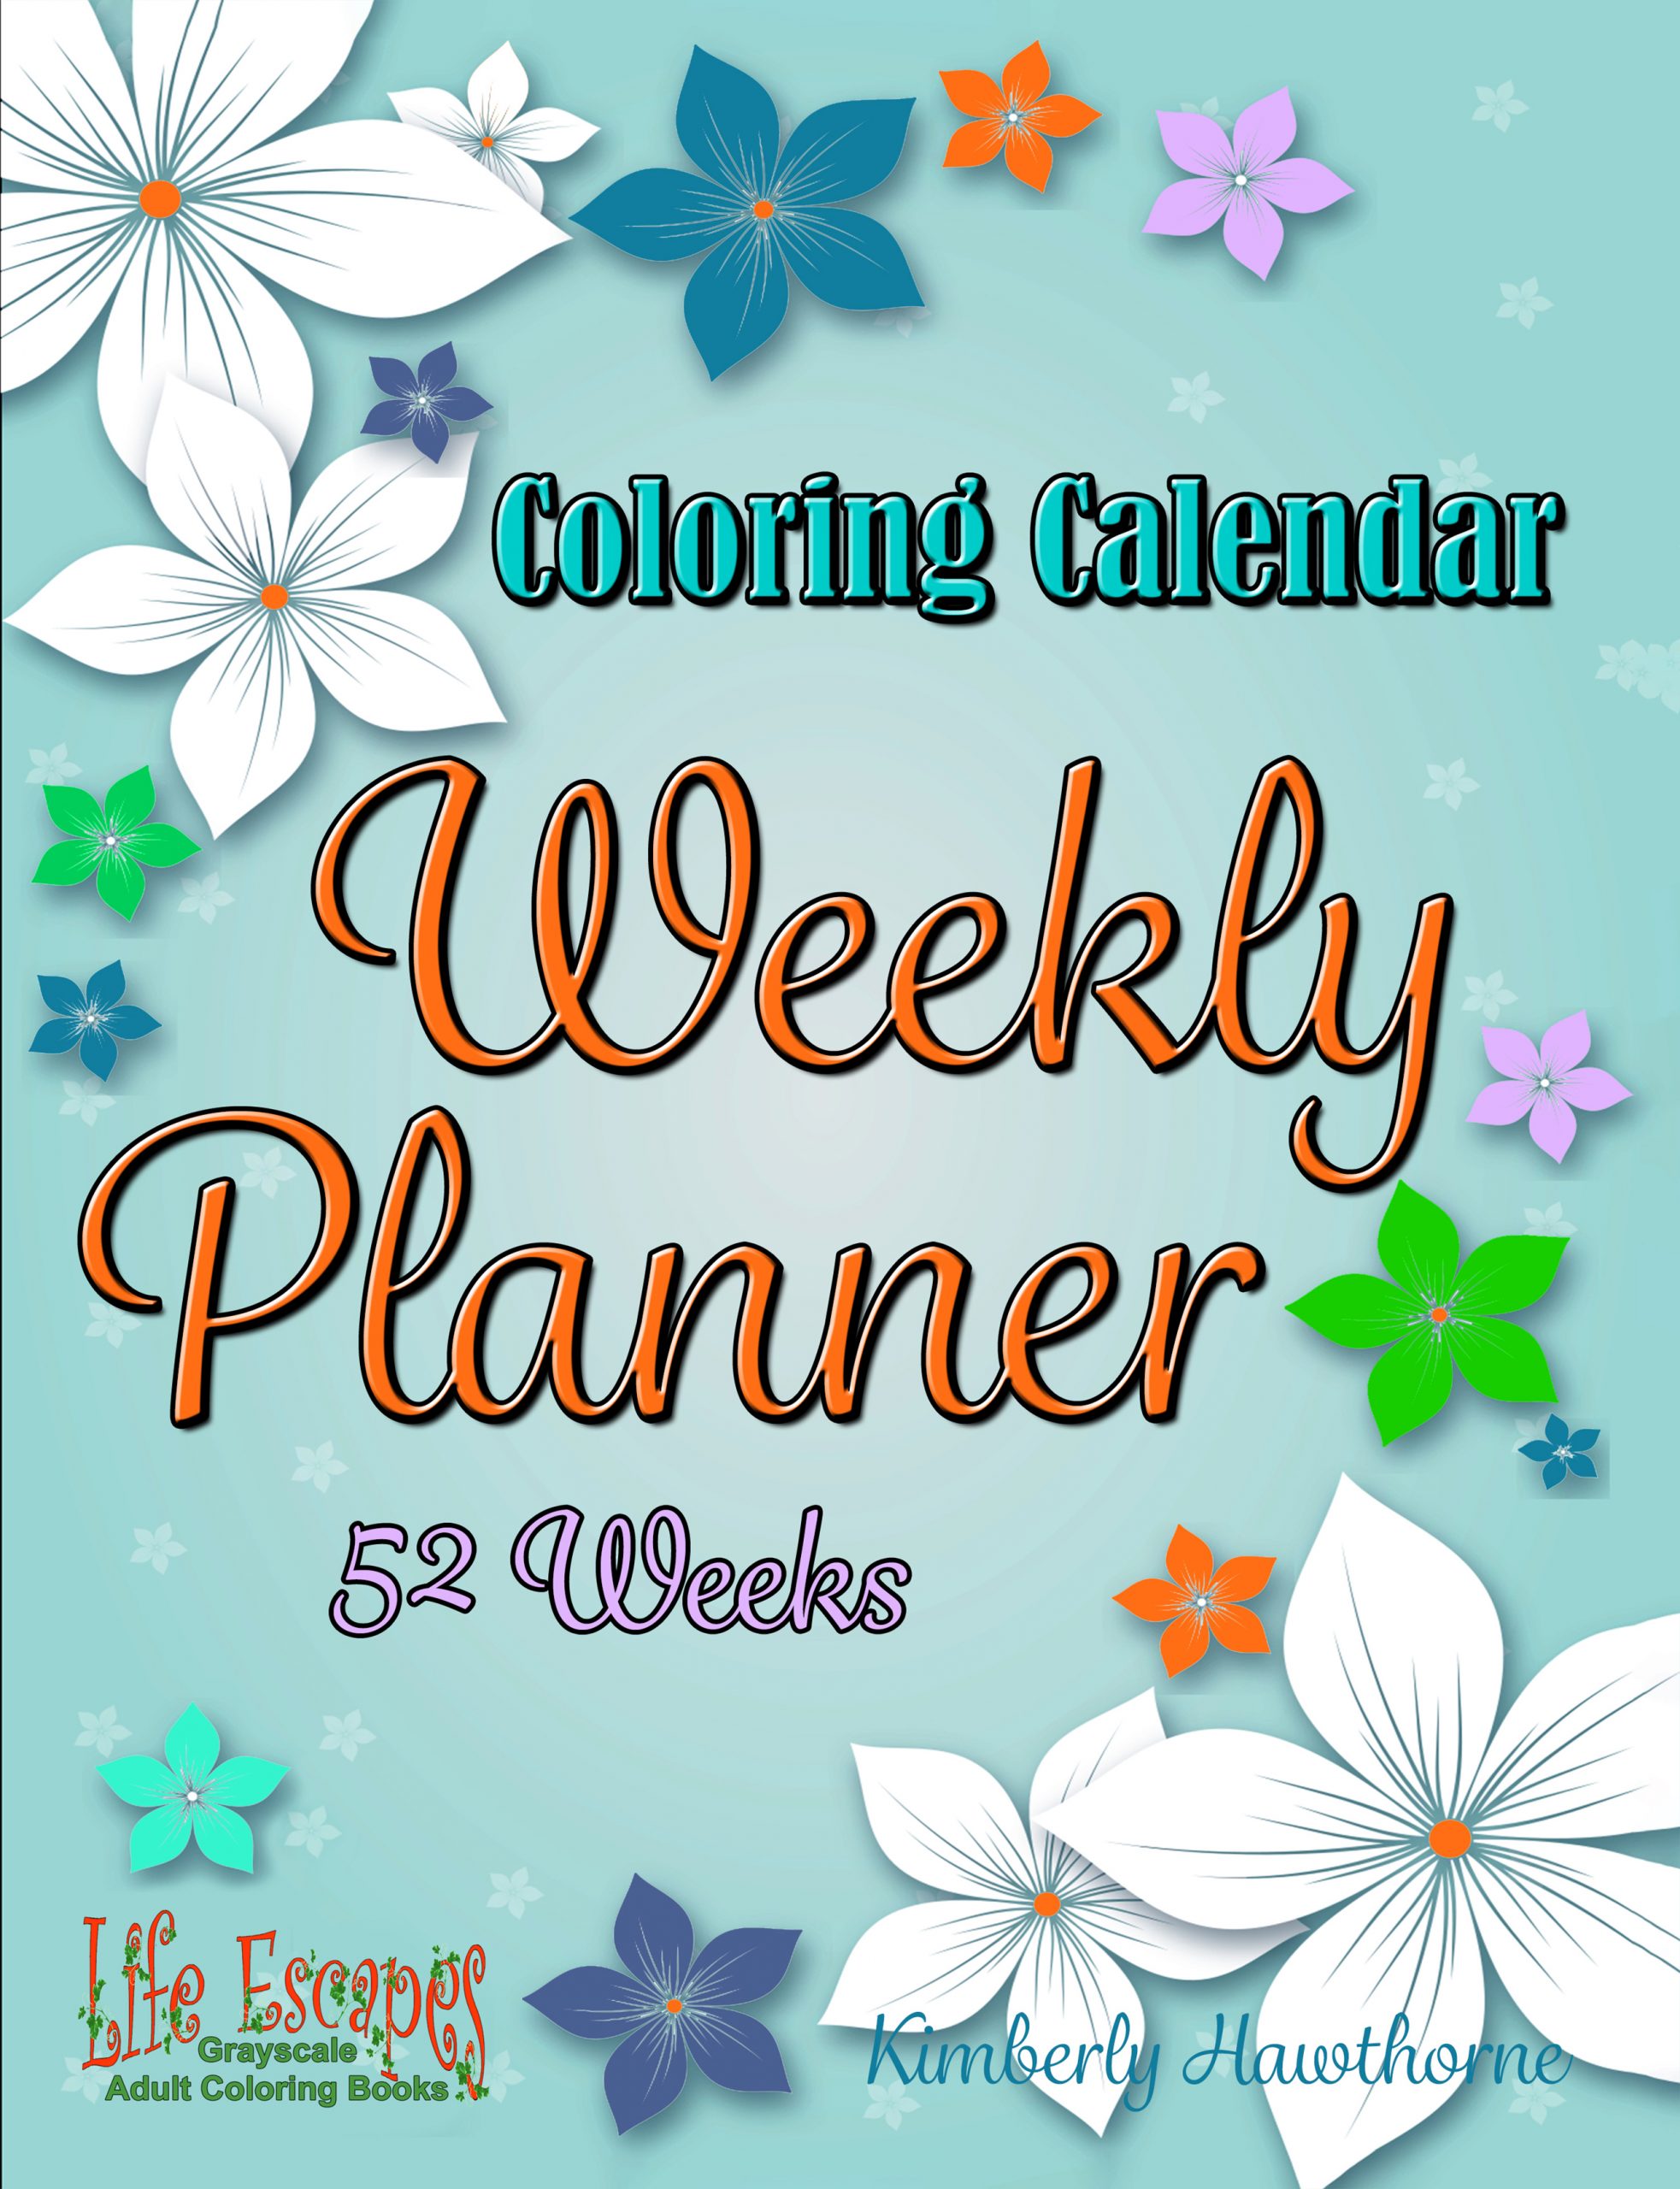 Coloring Calendar Weekly Planner PDF  Life Escapes Grayscale Adult Coloring  Books